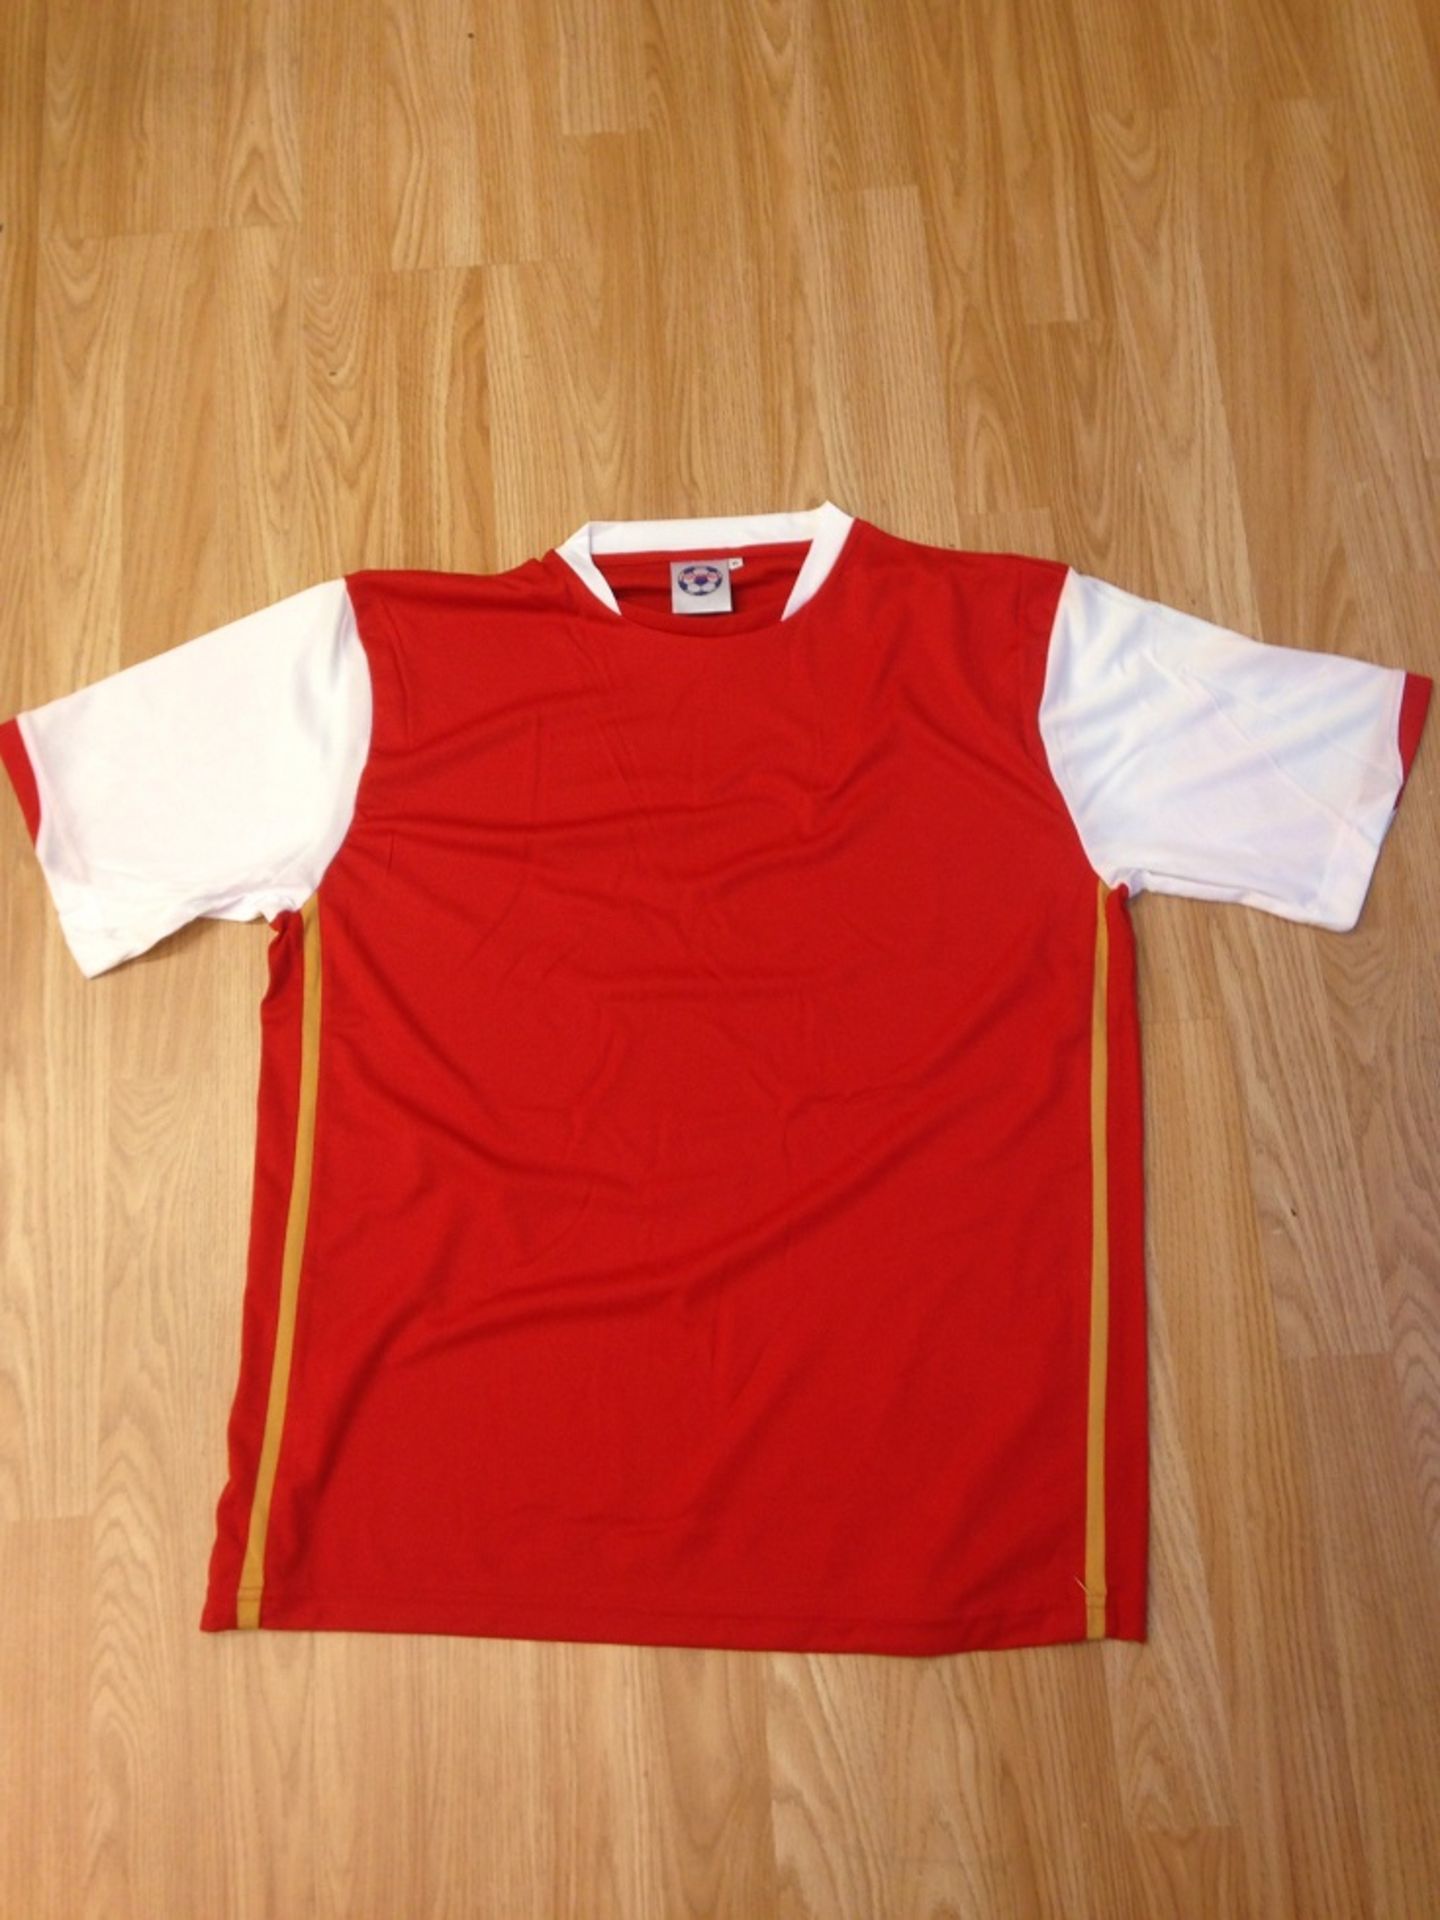 10 X BRAND NEW BAGGED RED WITH GOLD SIDE STRIPE FOOTBALL TOPS SIZE XL